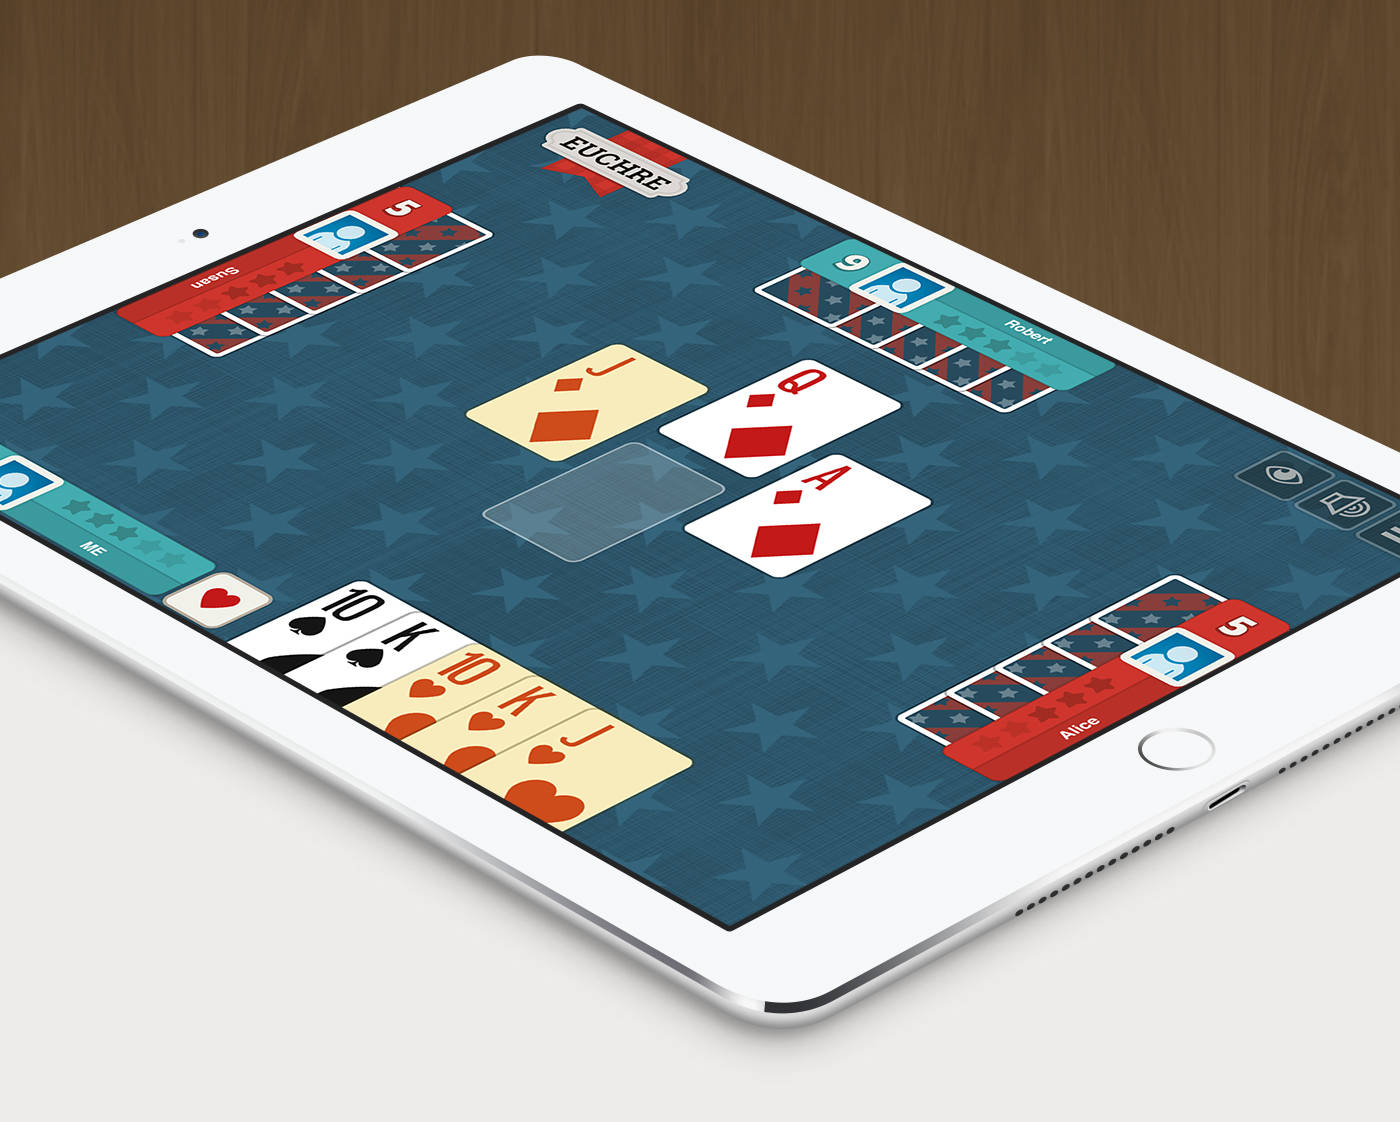 Euchre Playing Card Game On Ipad Wallpaper